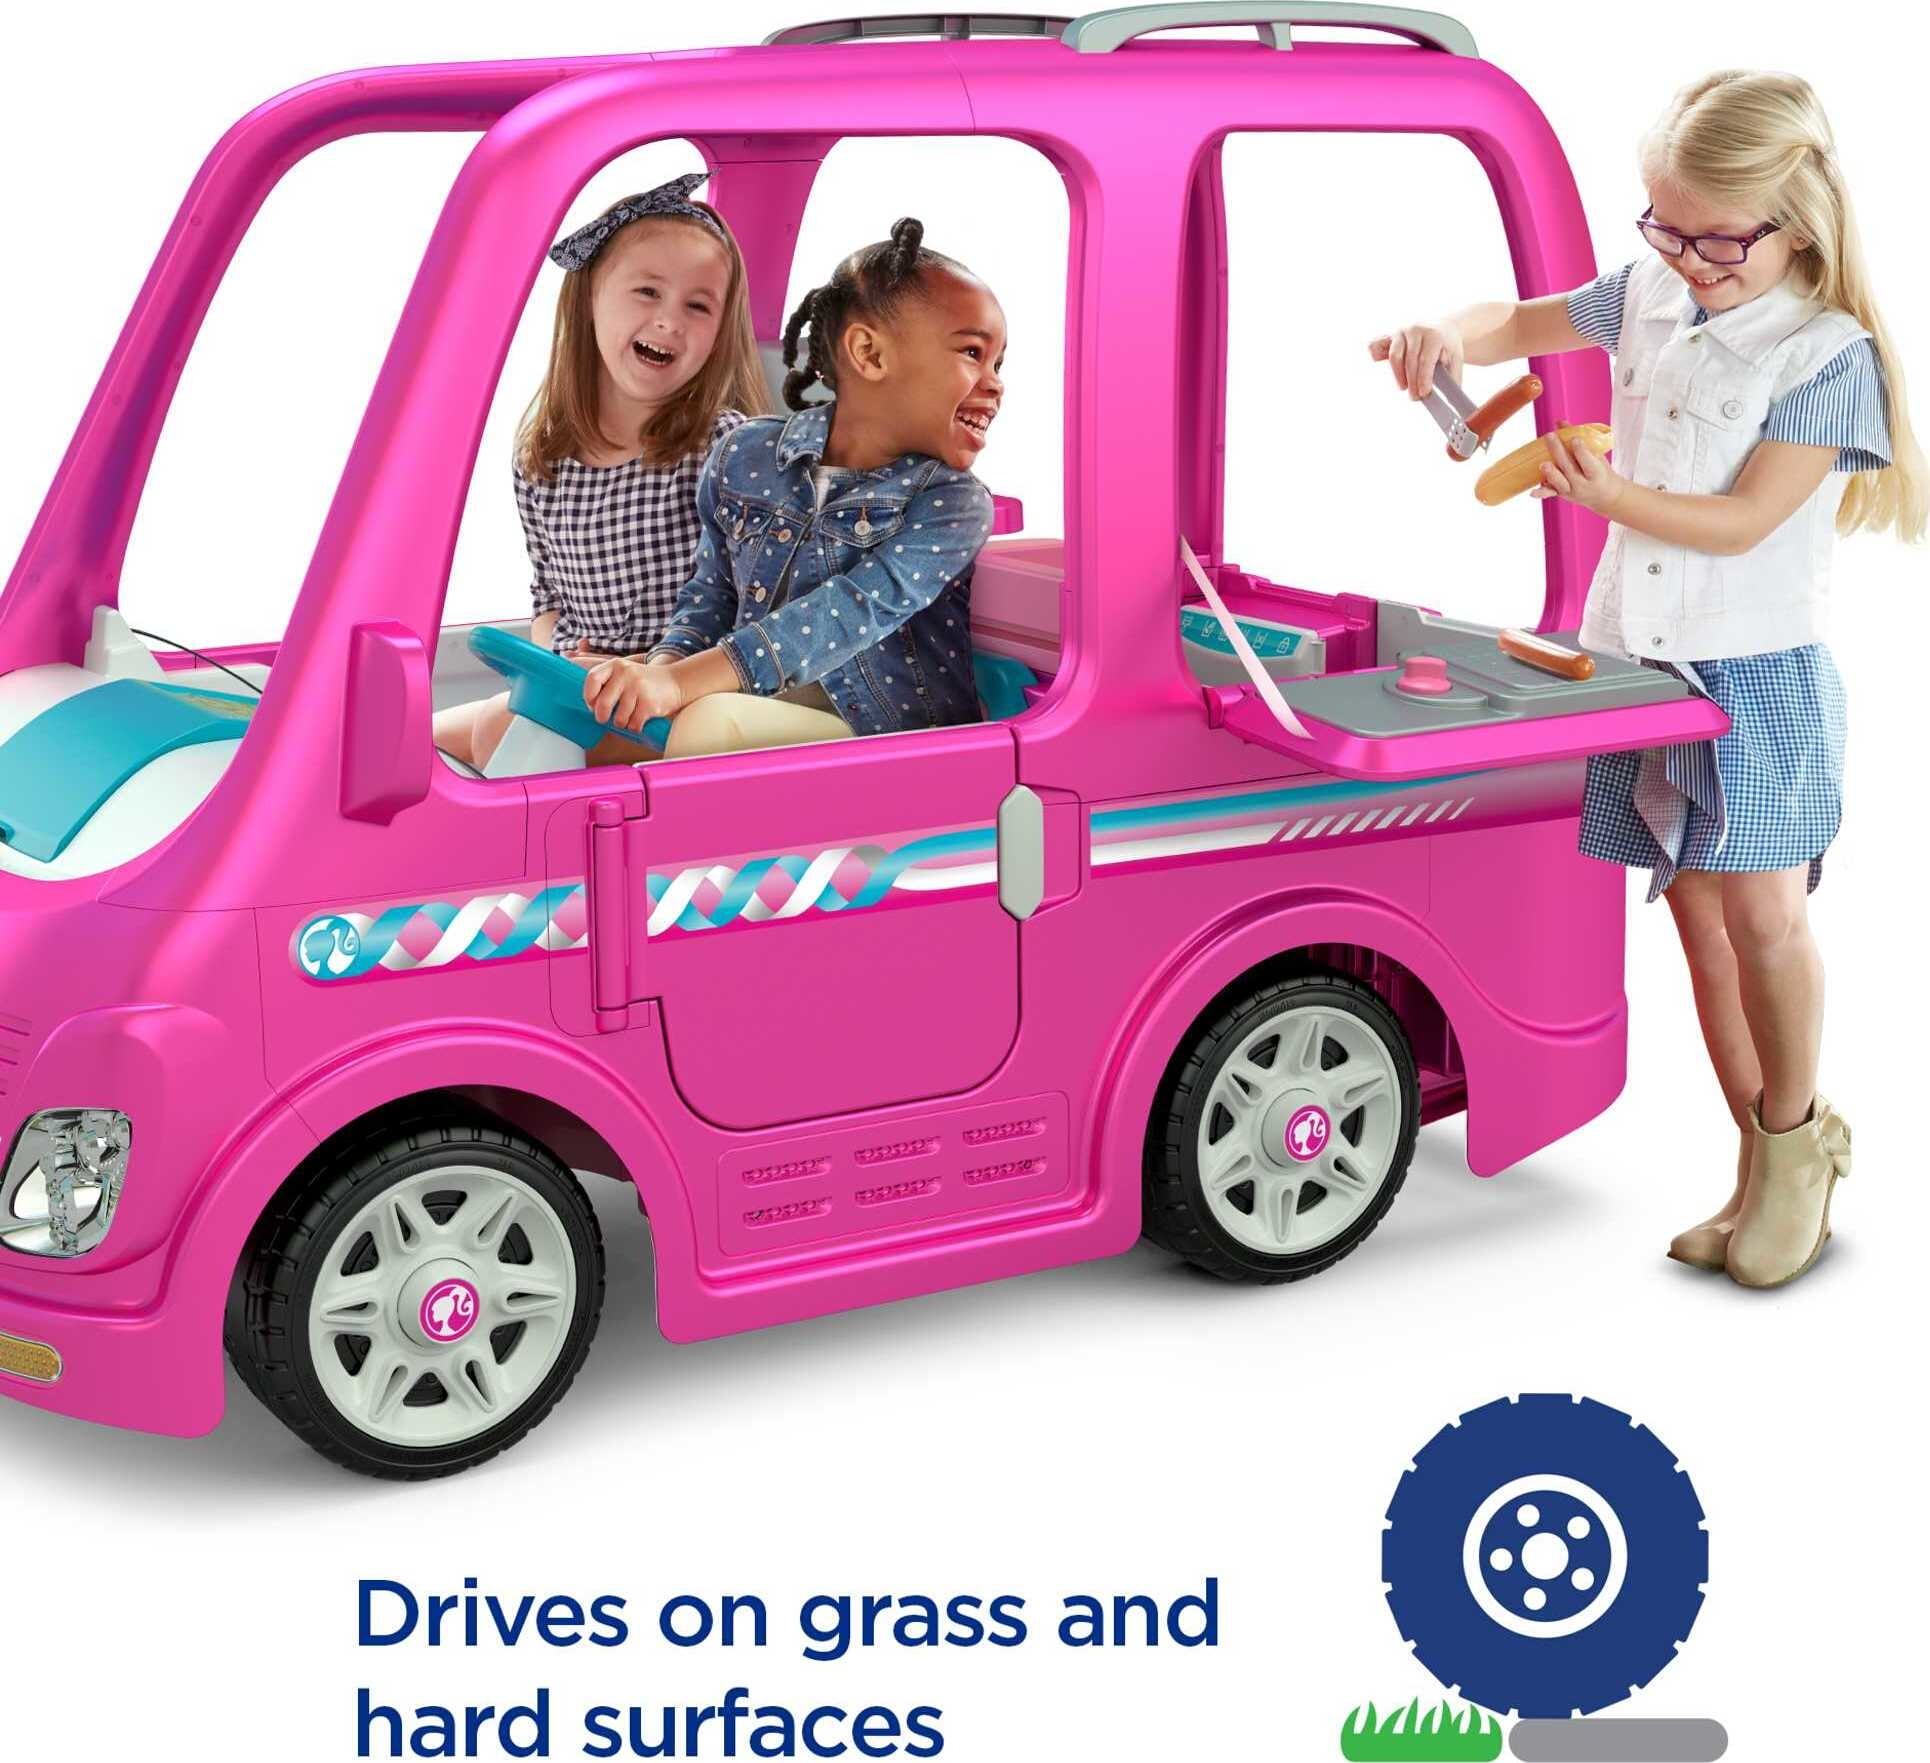 Power Wheels Barbie Dream Battery-Powered Ride-On with Music Sounds 14 - Walmart.com